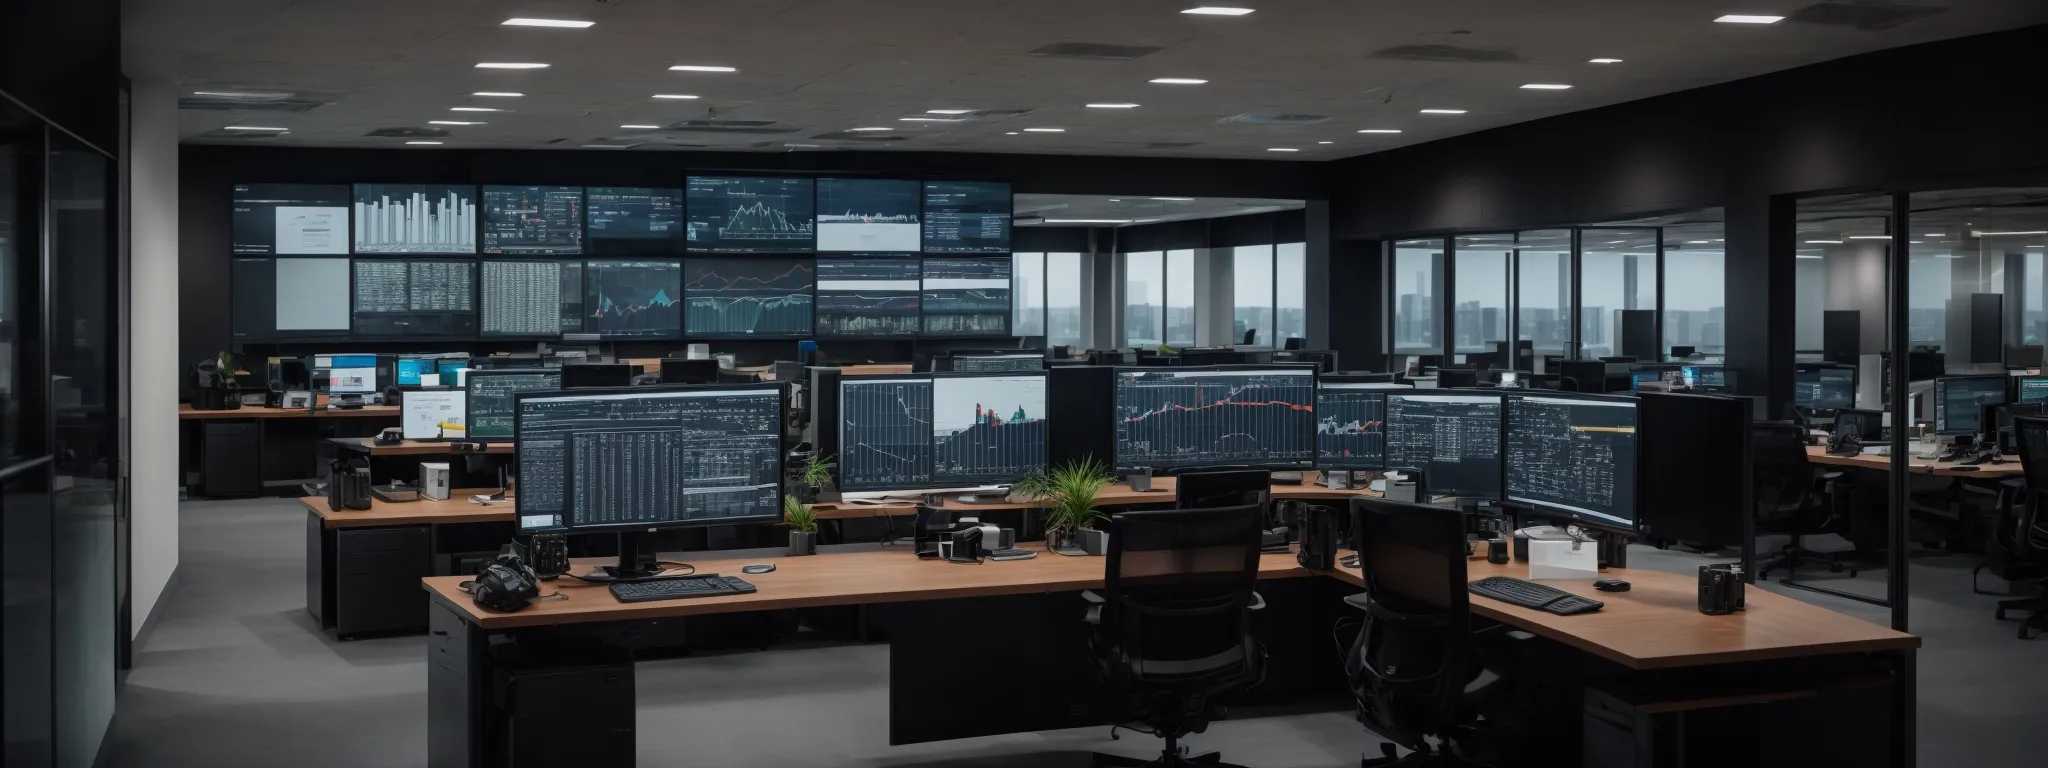 a panoramic view of a modern office with multiple large computer screens displaying graphs and analytics dashboards.